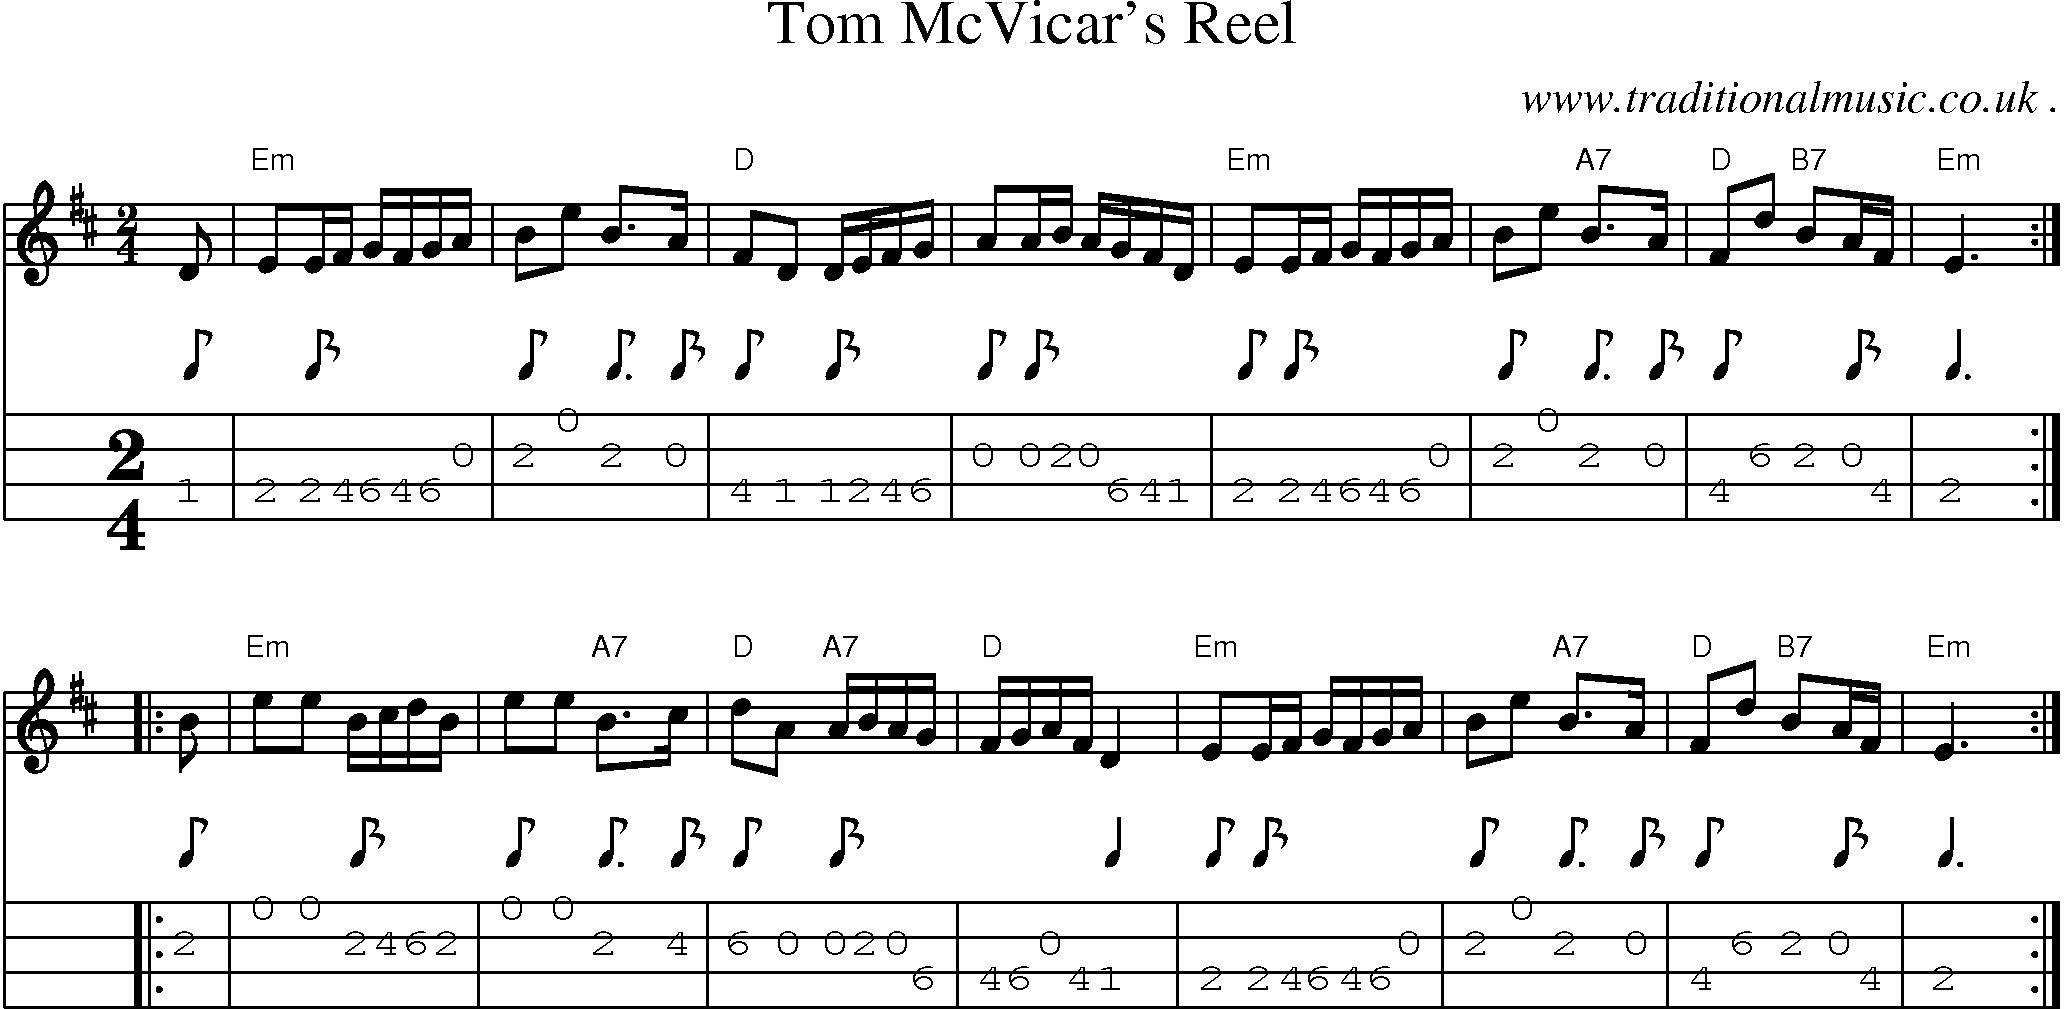 Sheet-music  score, Chords and Mandolin Tabs for Tom Mcvicars Reel1